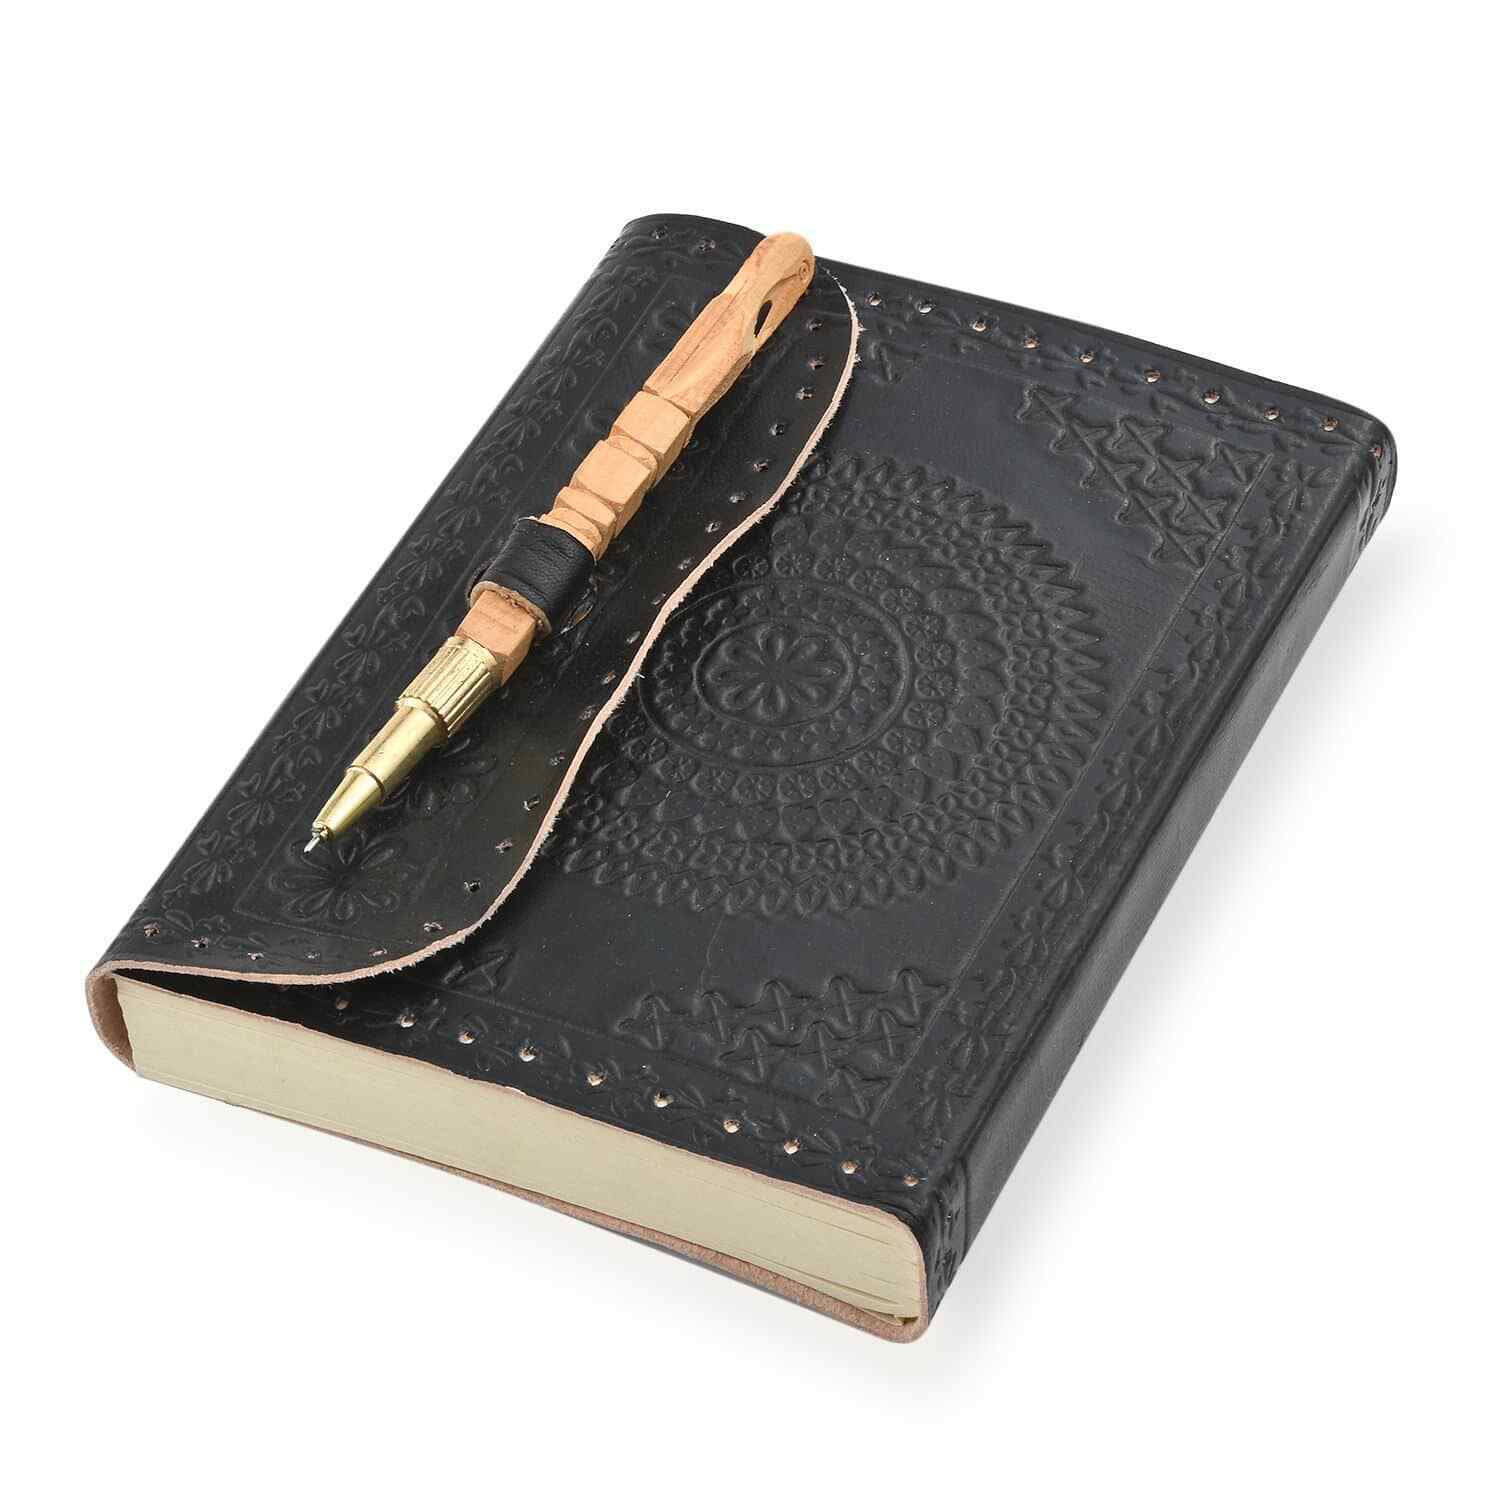 Black Genuine Leather Flower Embossed Journal with Wooden Pen Paper Notebook